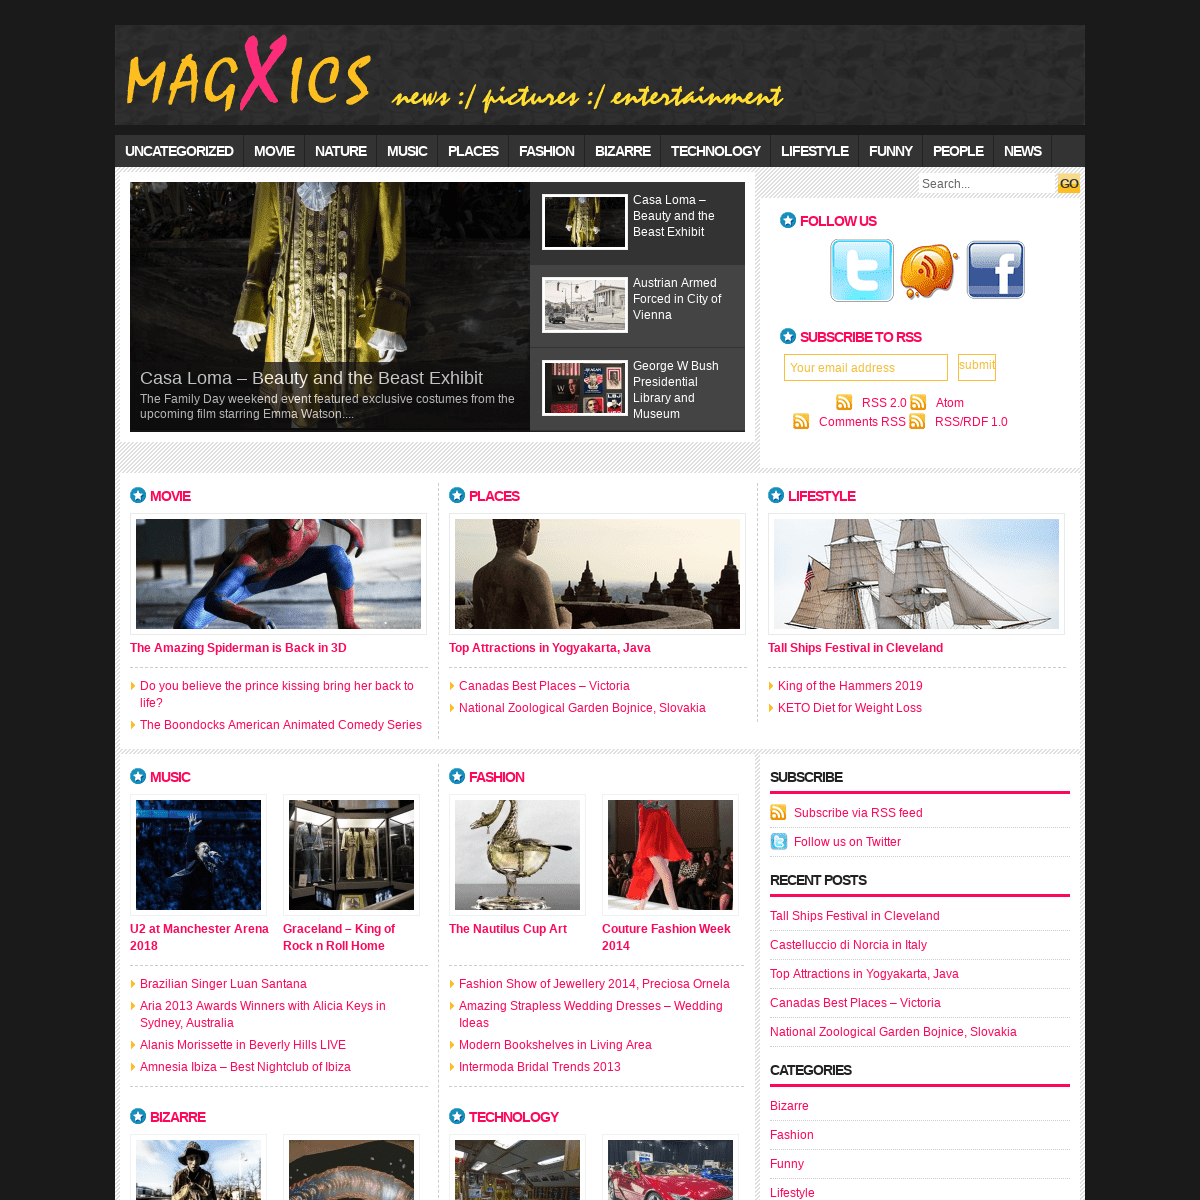 MagXics - The Best News, Pictures and Entertainment